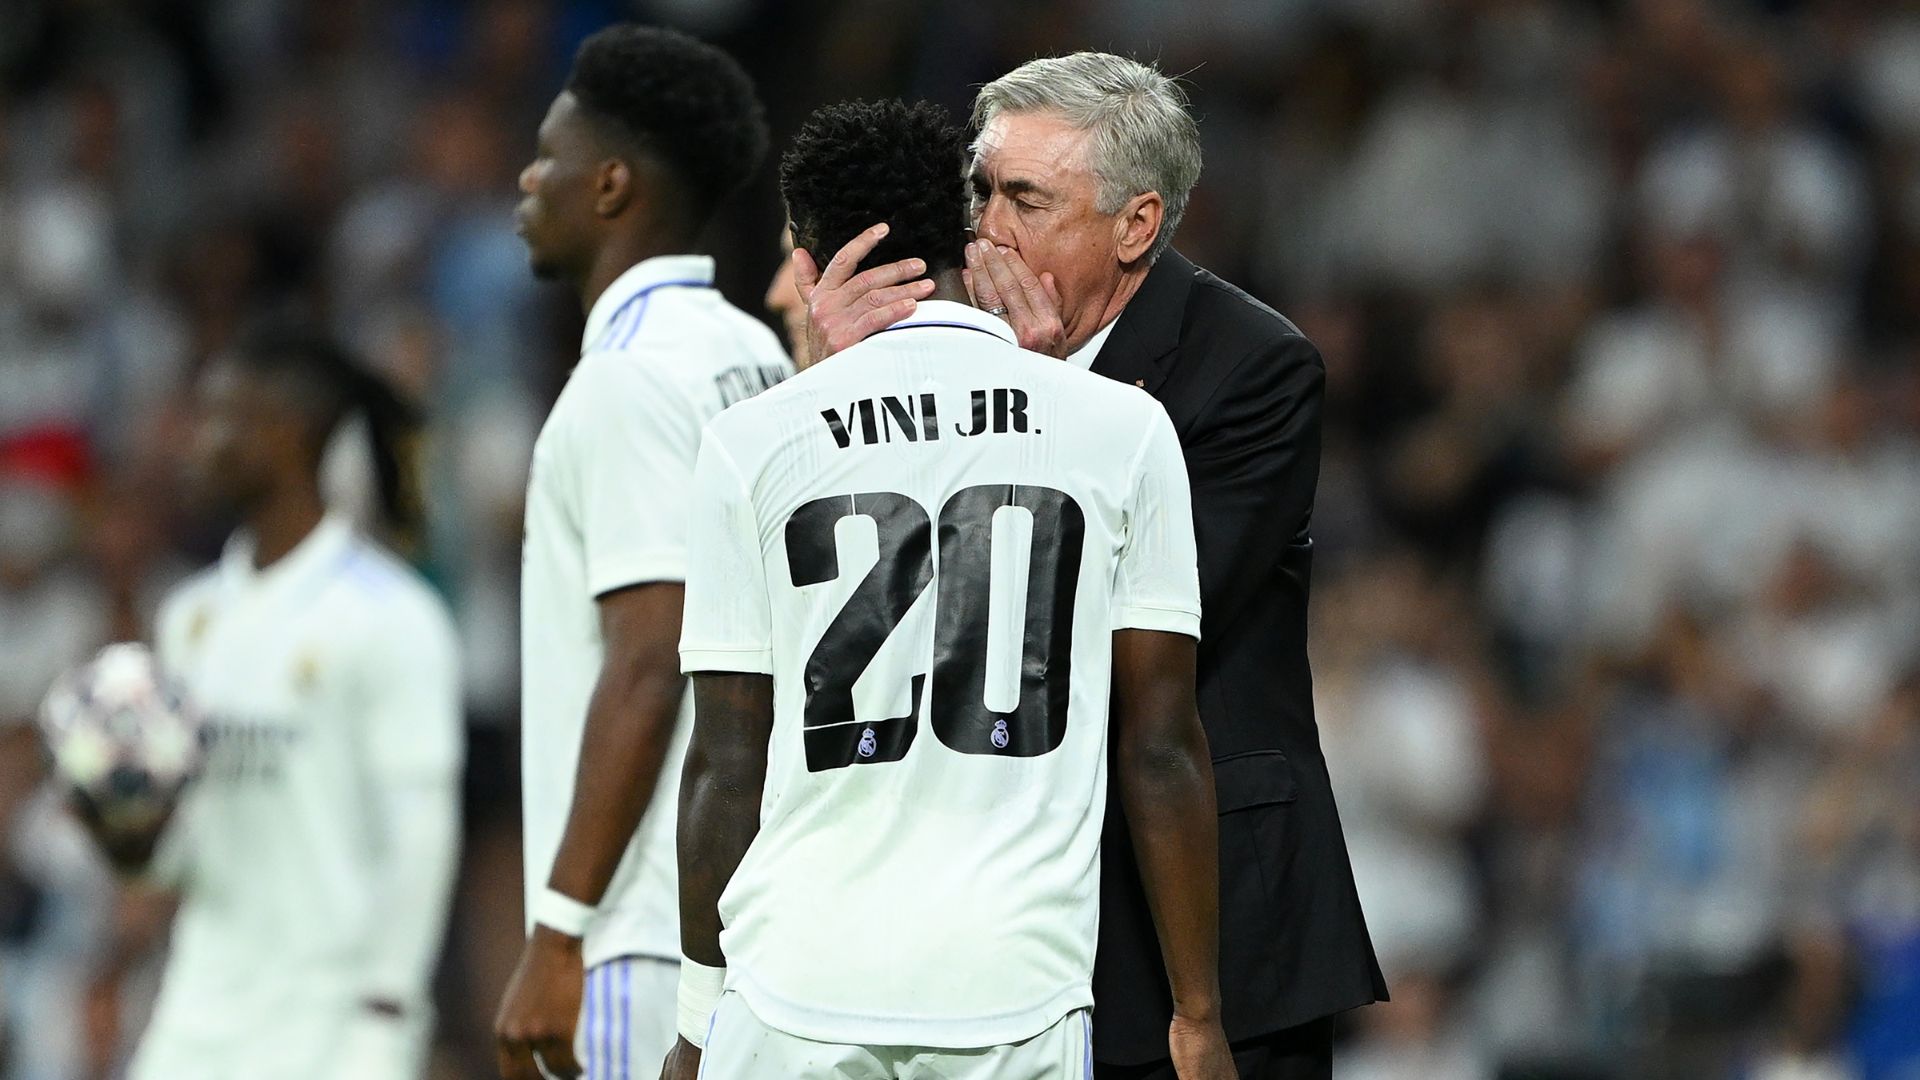 Carlo Ancelotti passing instruction to Vini Jr (Credit: Getty Images)